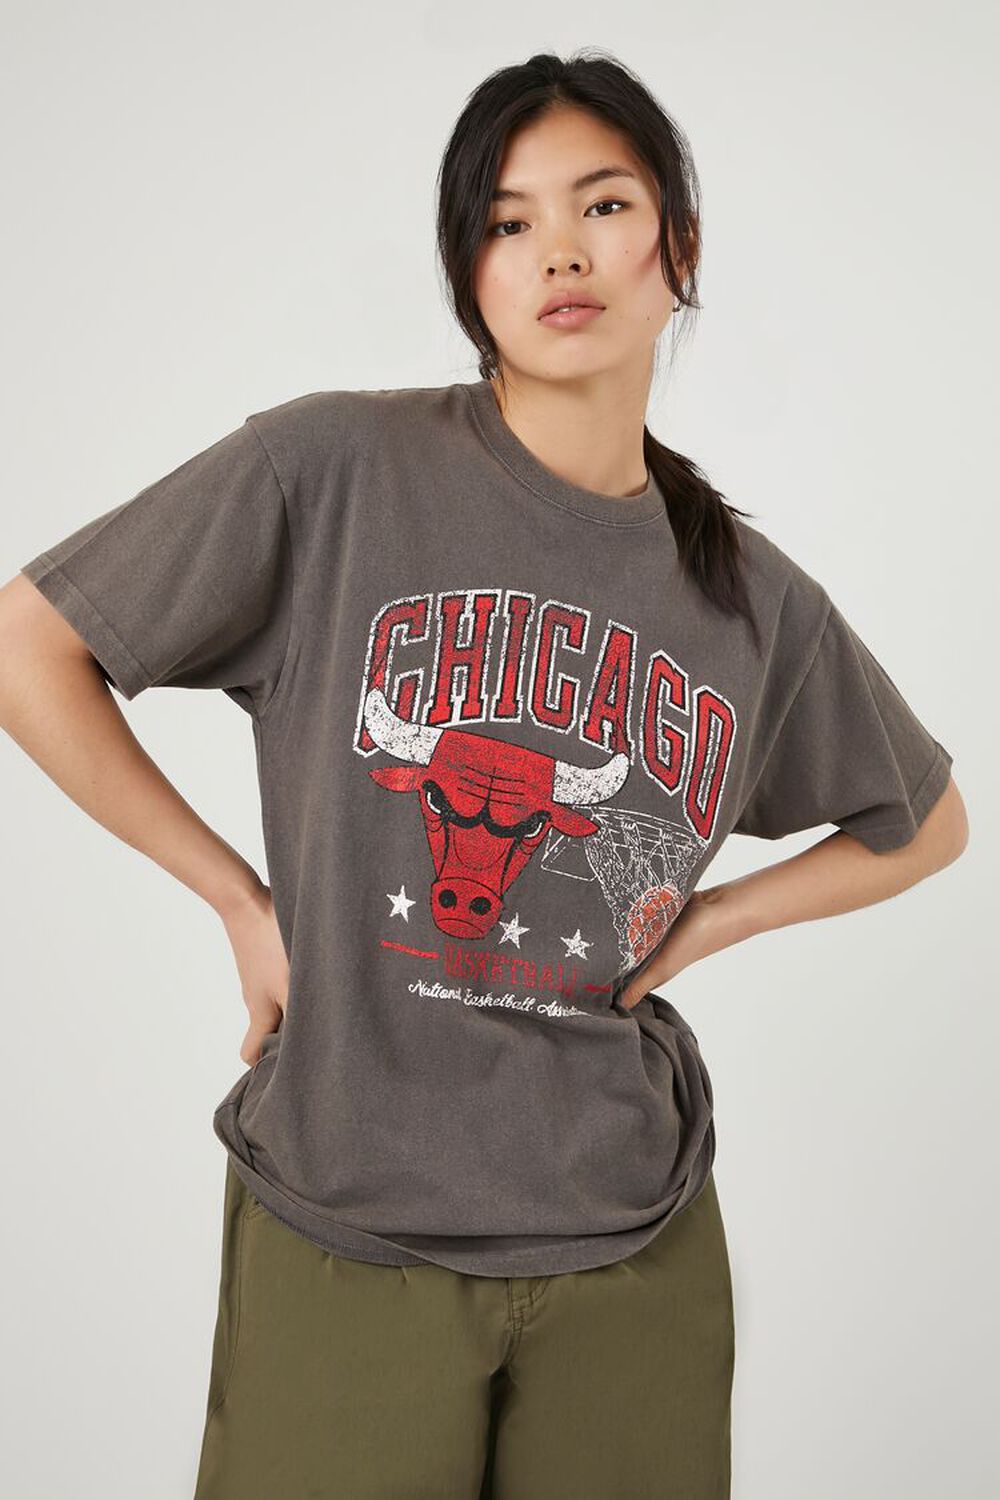 Aéropostale Chicago Bulls Basketball Graphic Tee